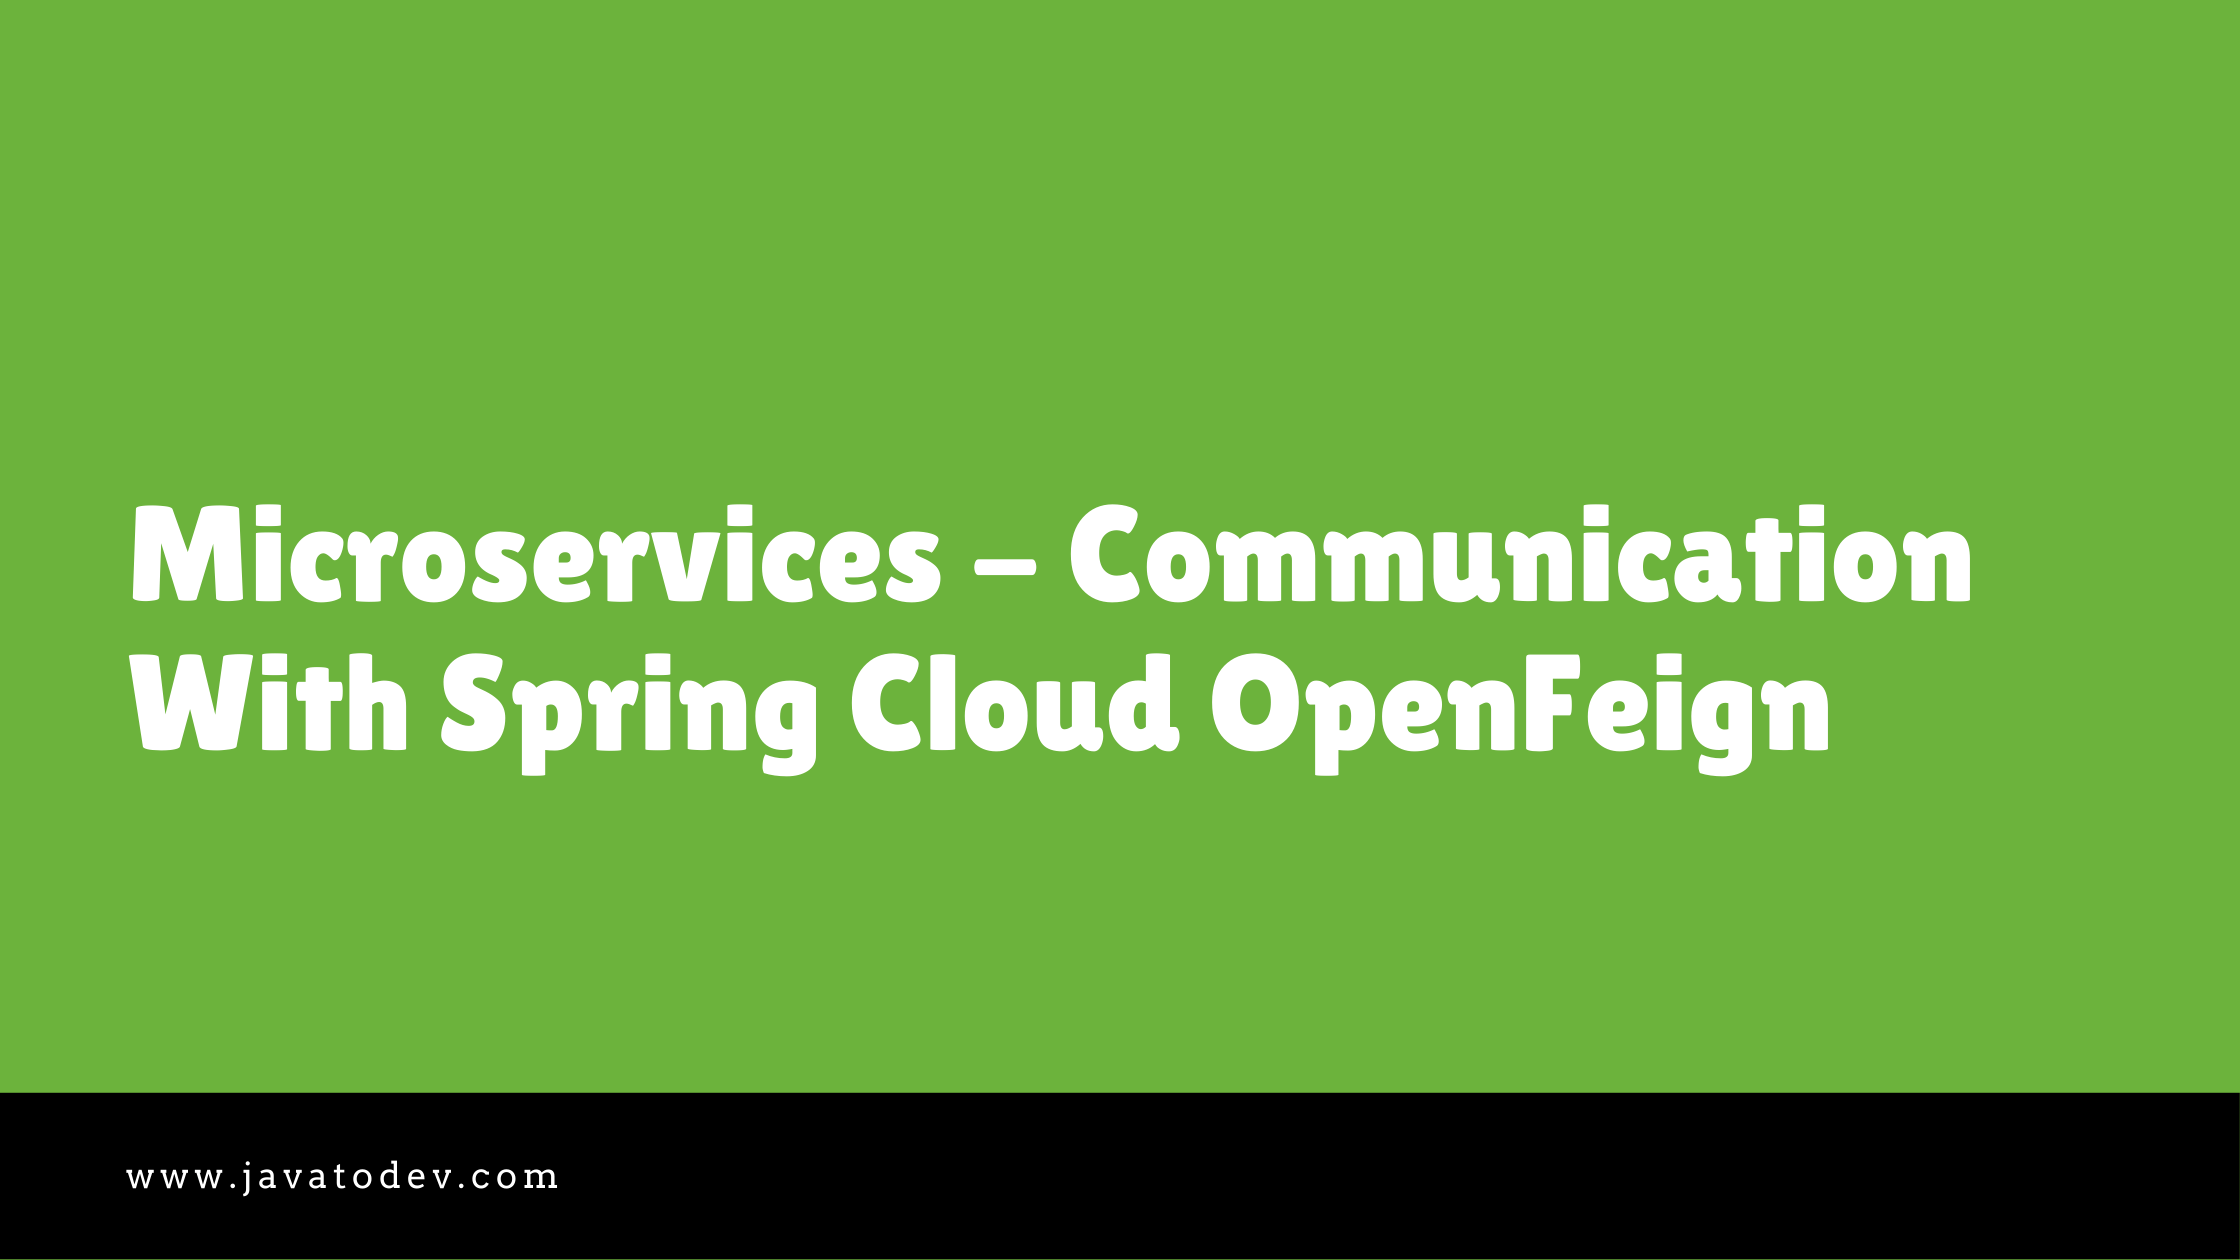 Microservices - Communication With Spring Cloud OpenFeign